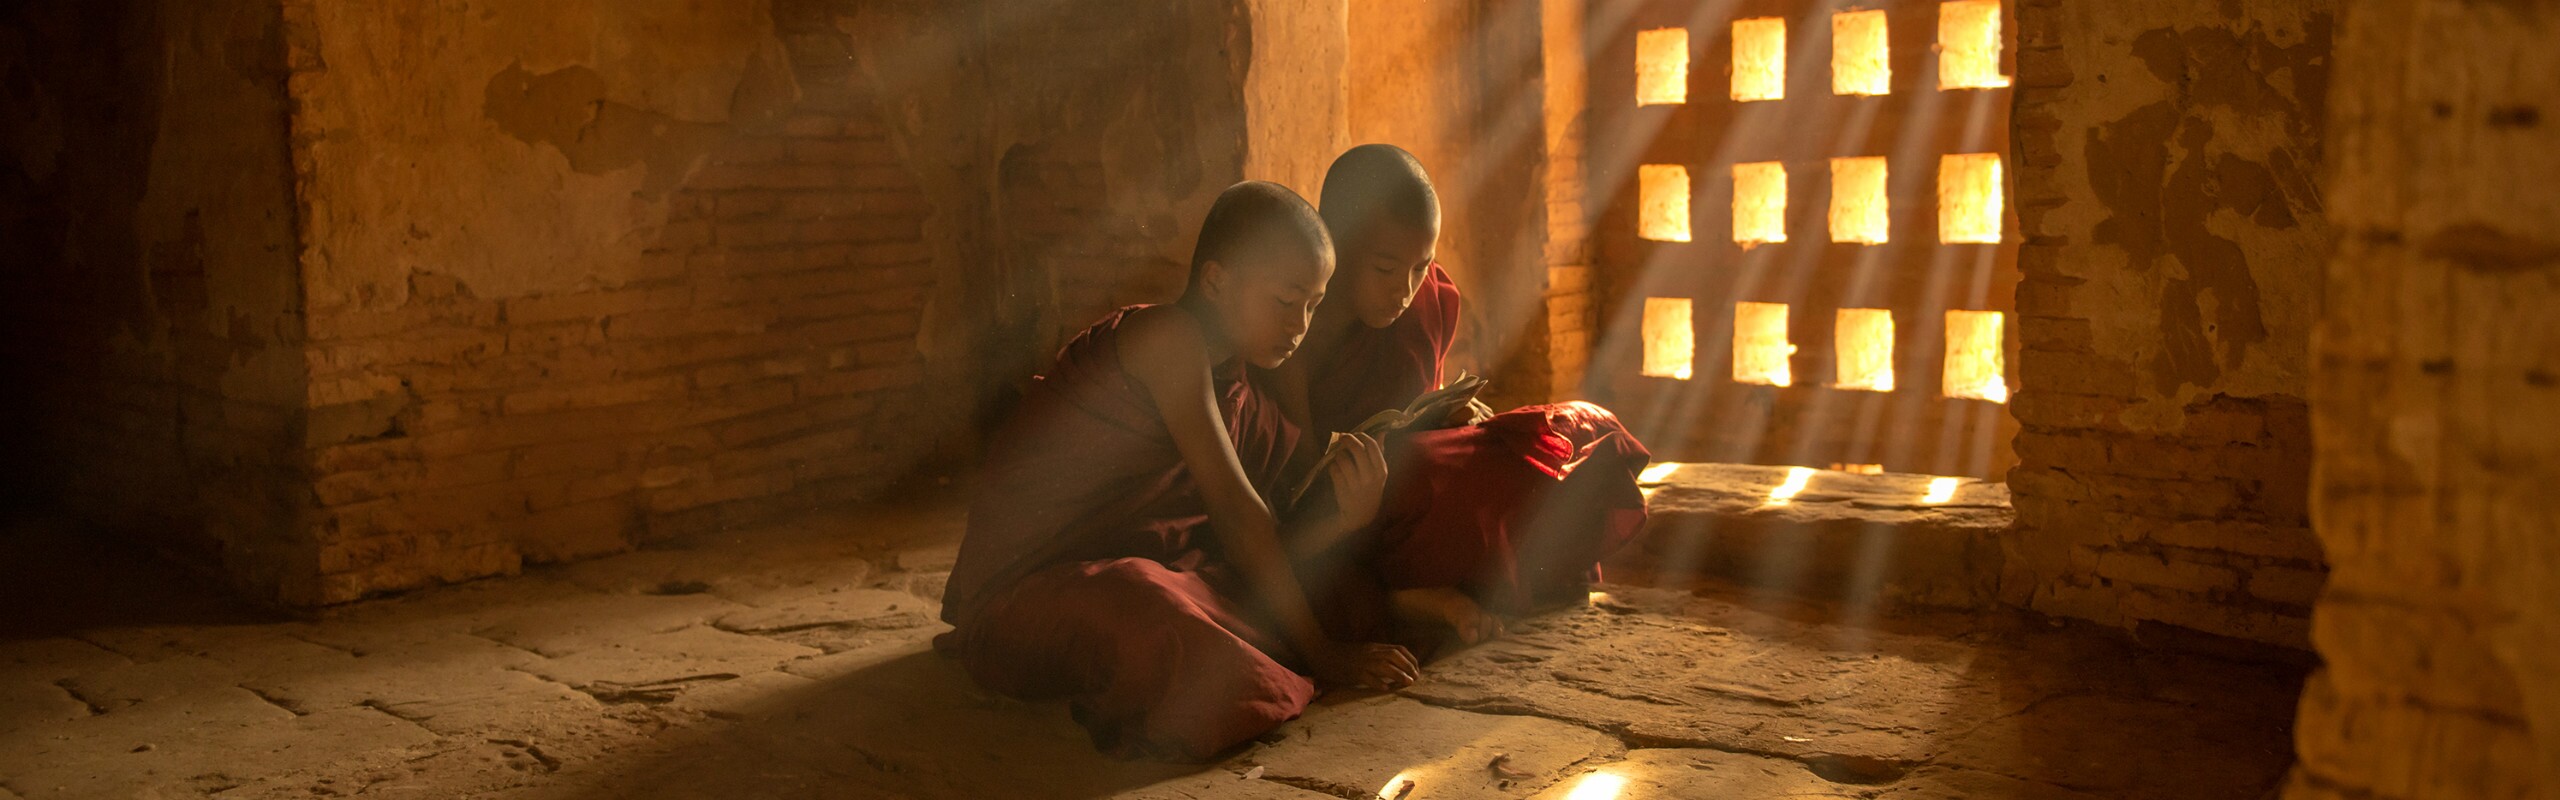 Basic Facts about Myanmar - Living Buddhism